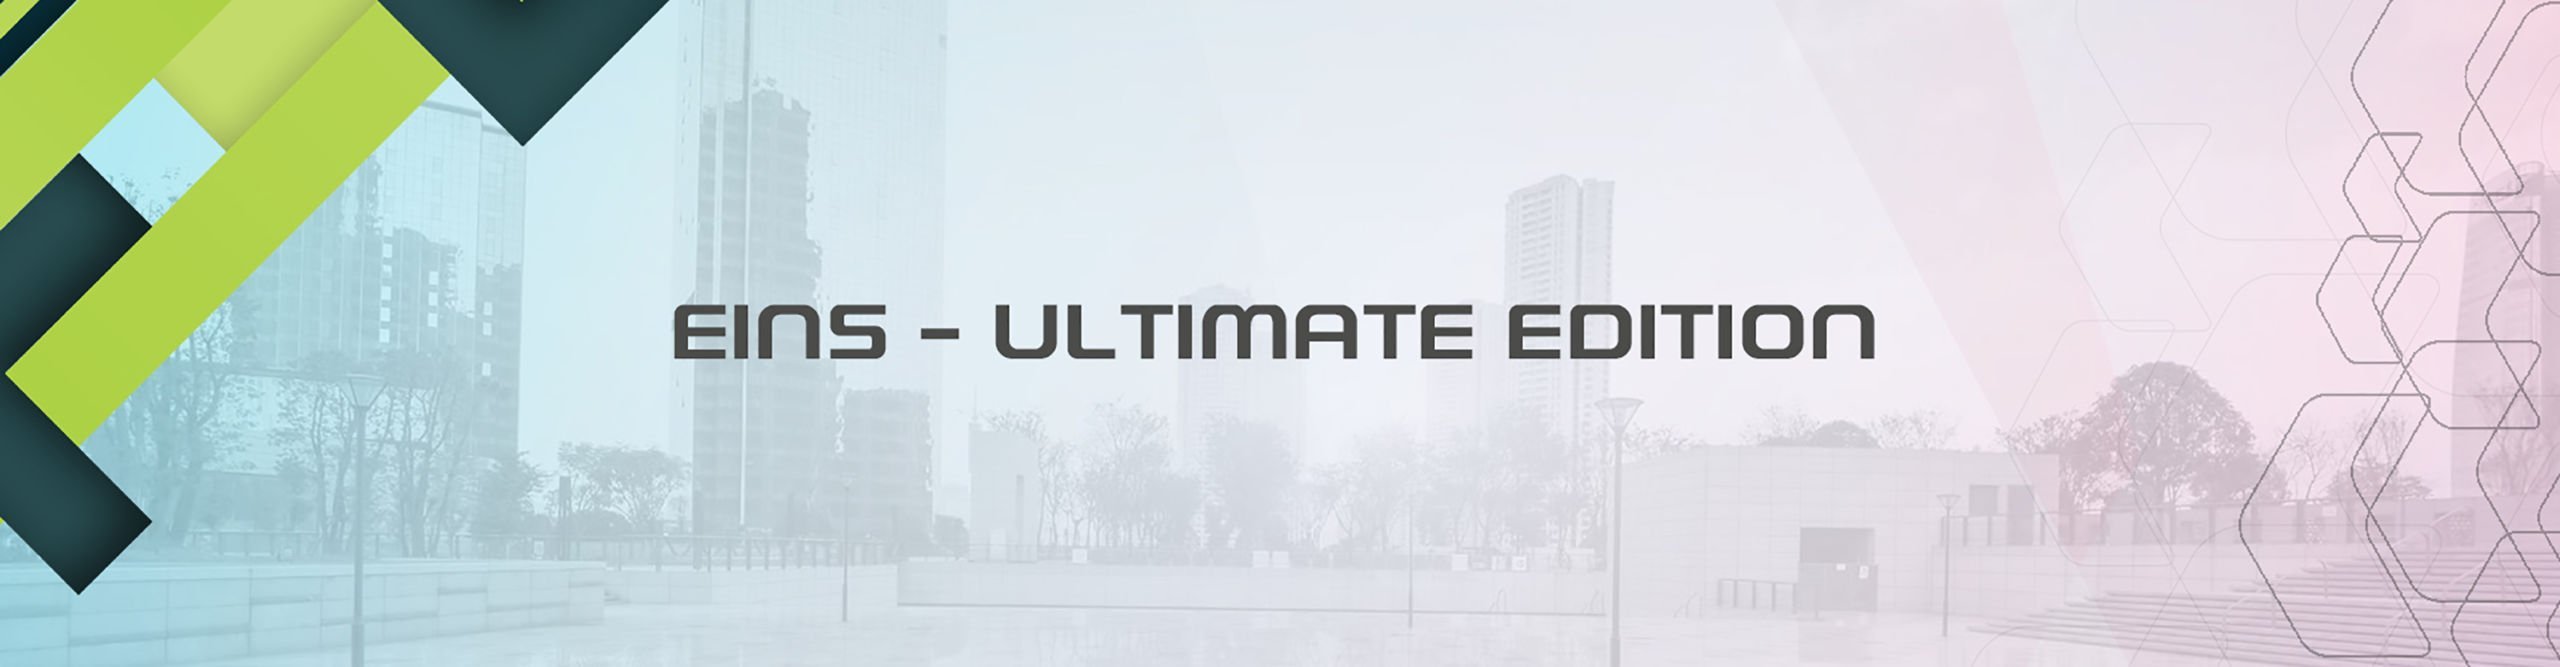 EINS - Ultimate edition